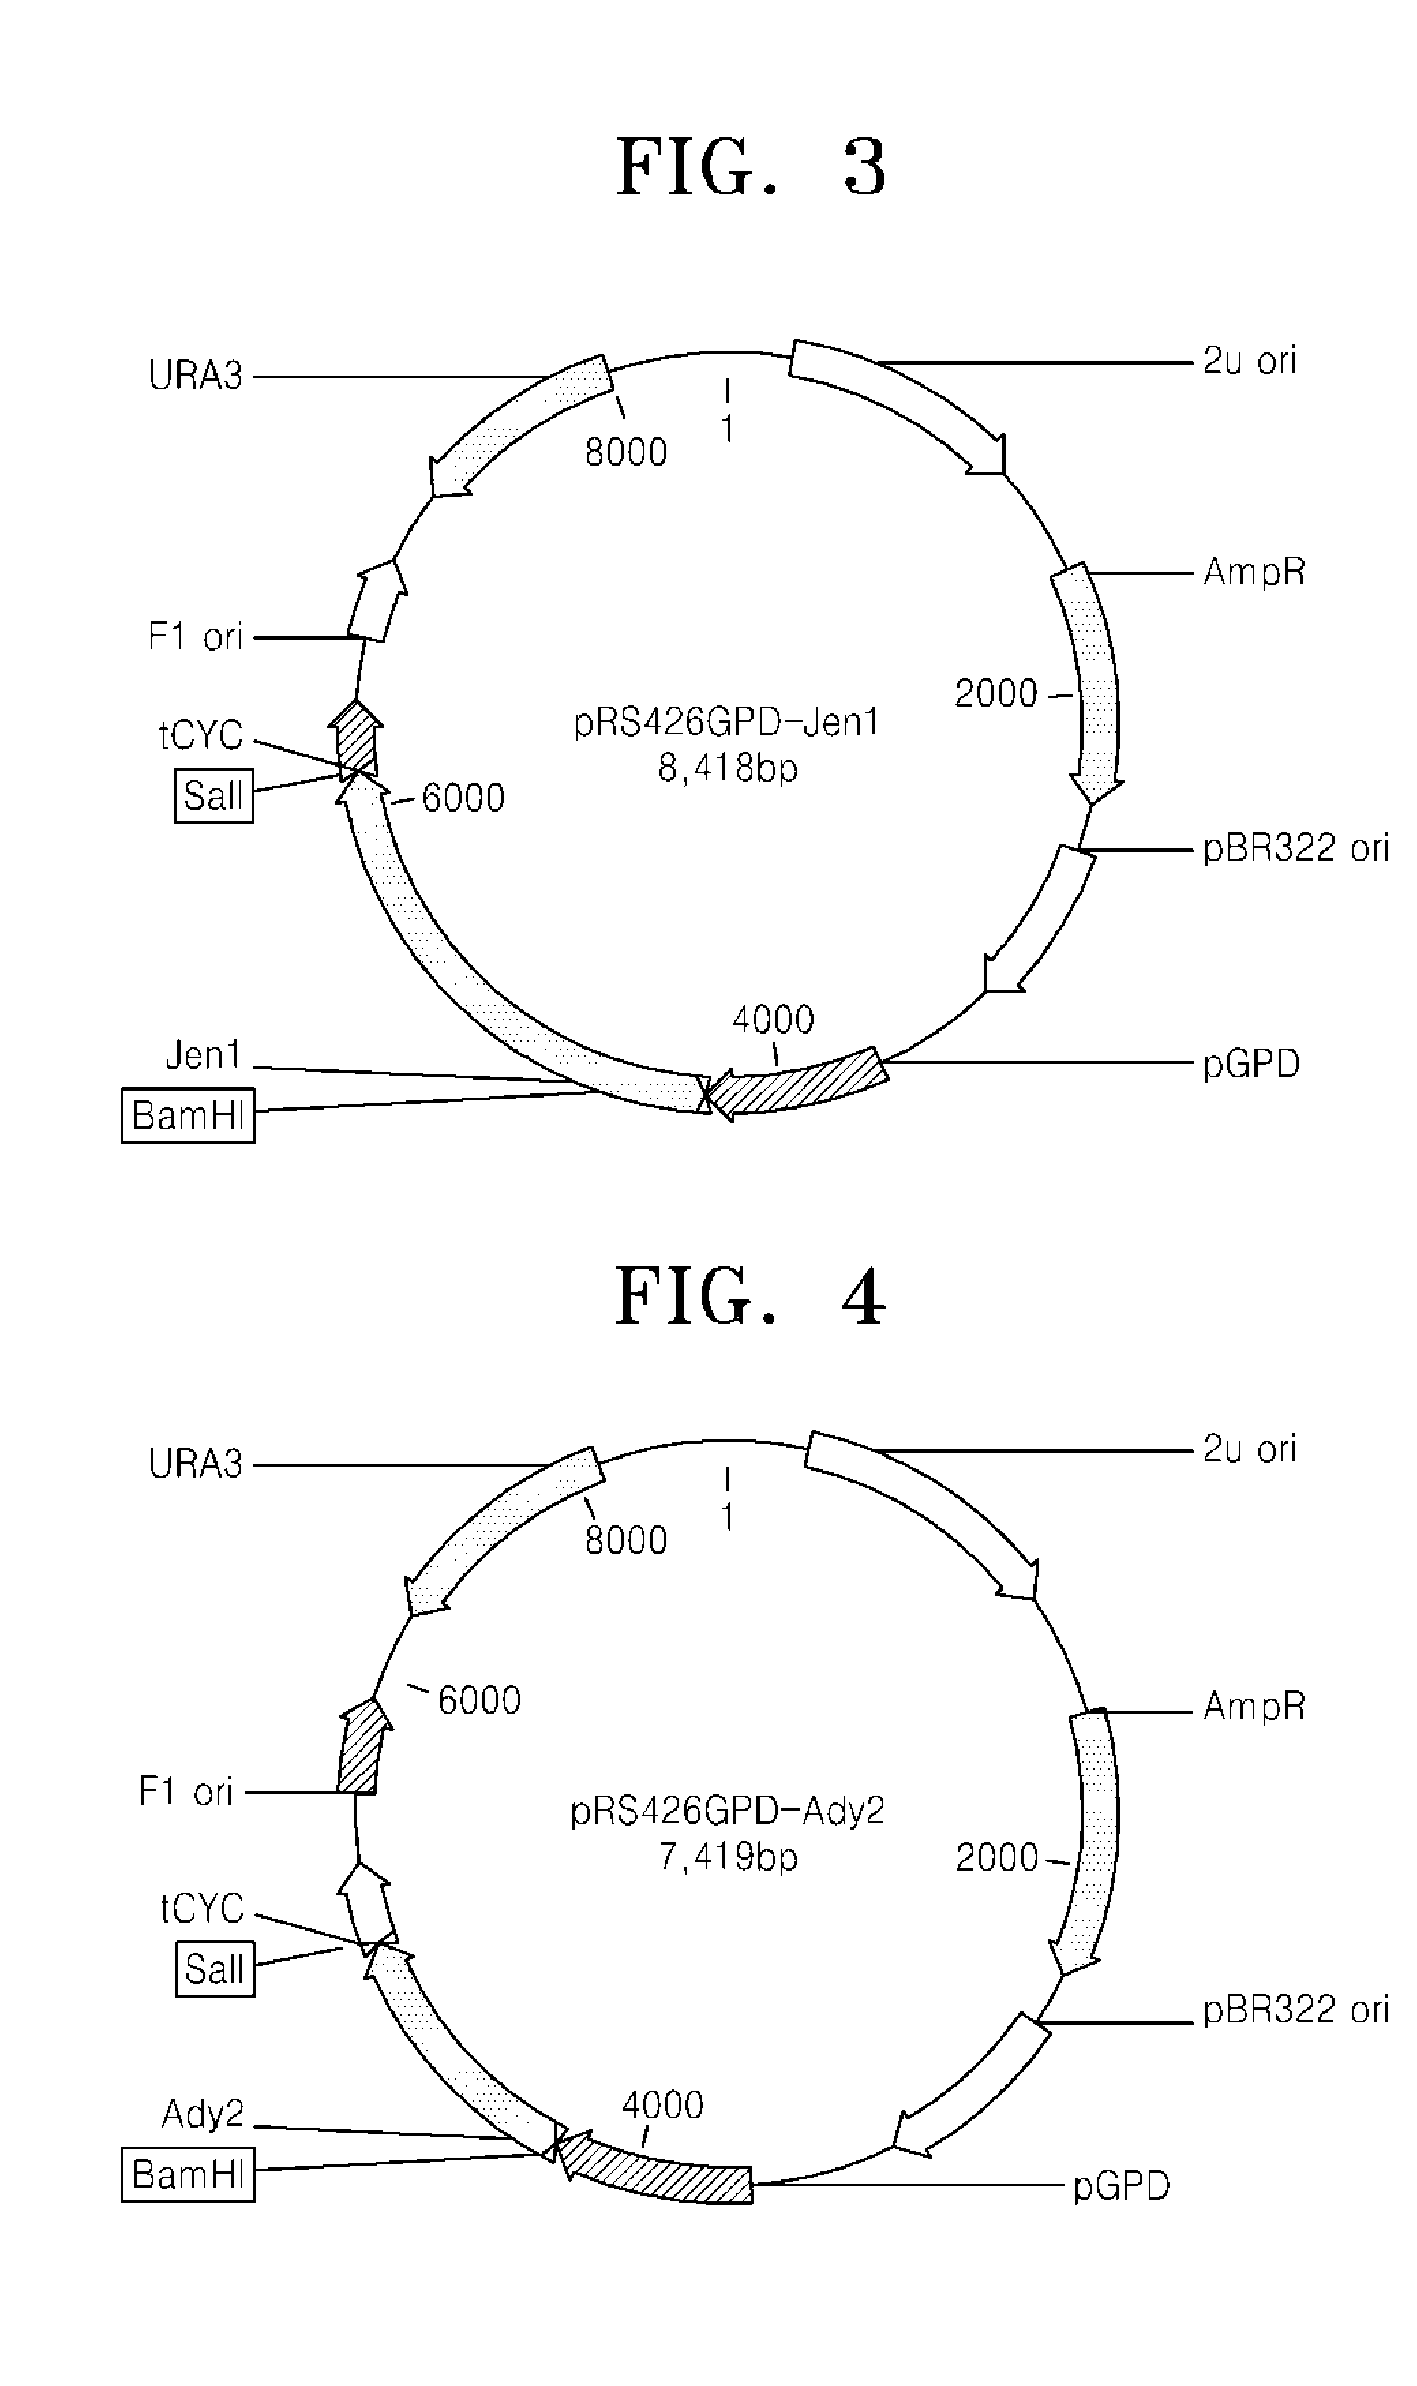 Microorganism over-expressing lactic acid transporter gene and having inhibitory pathway of lactic acid degradation, and method of producing lactic acid using the microorganism